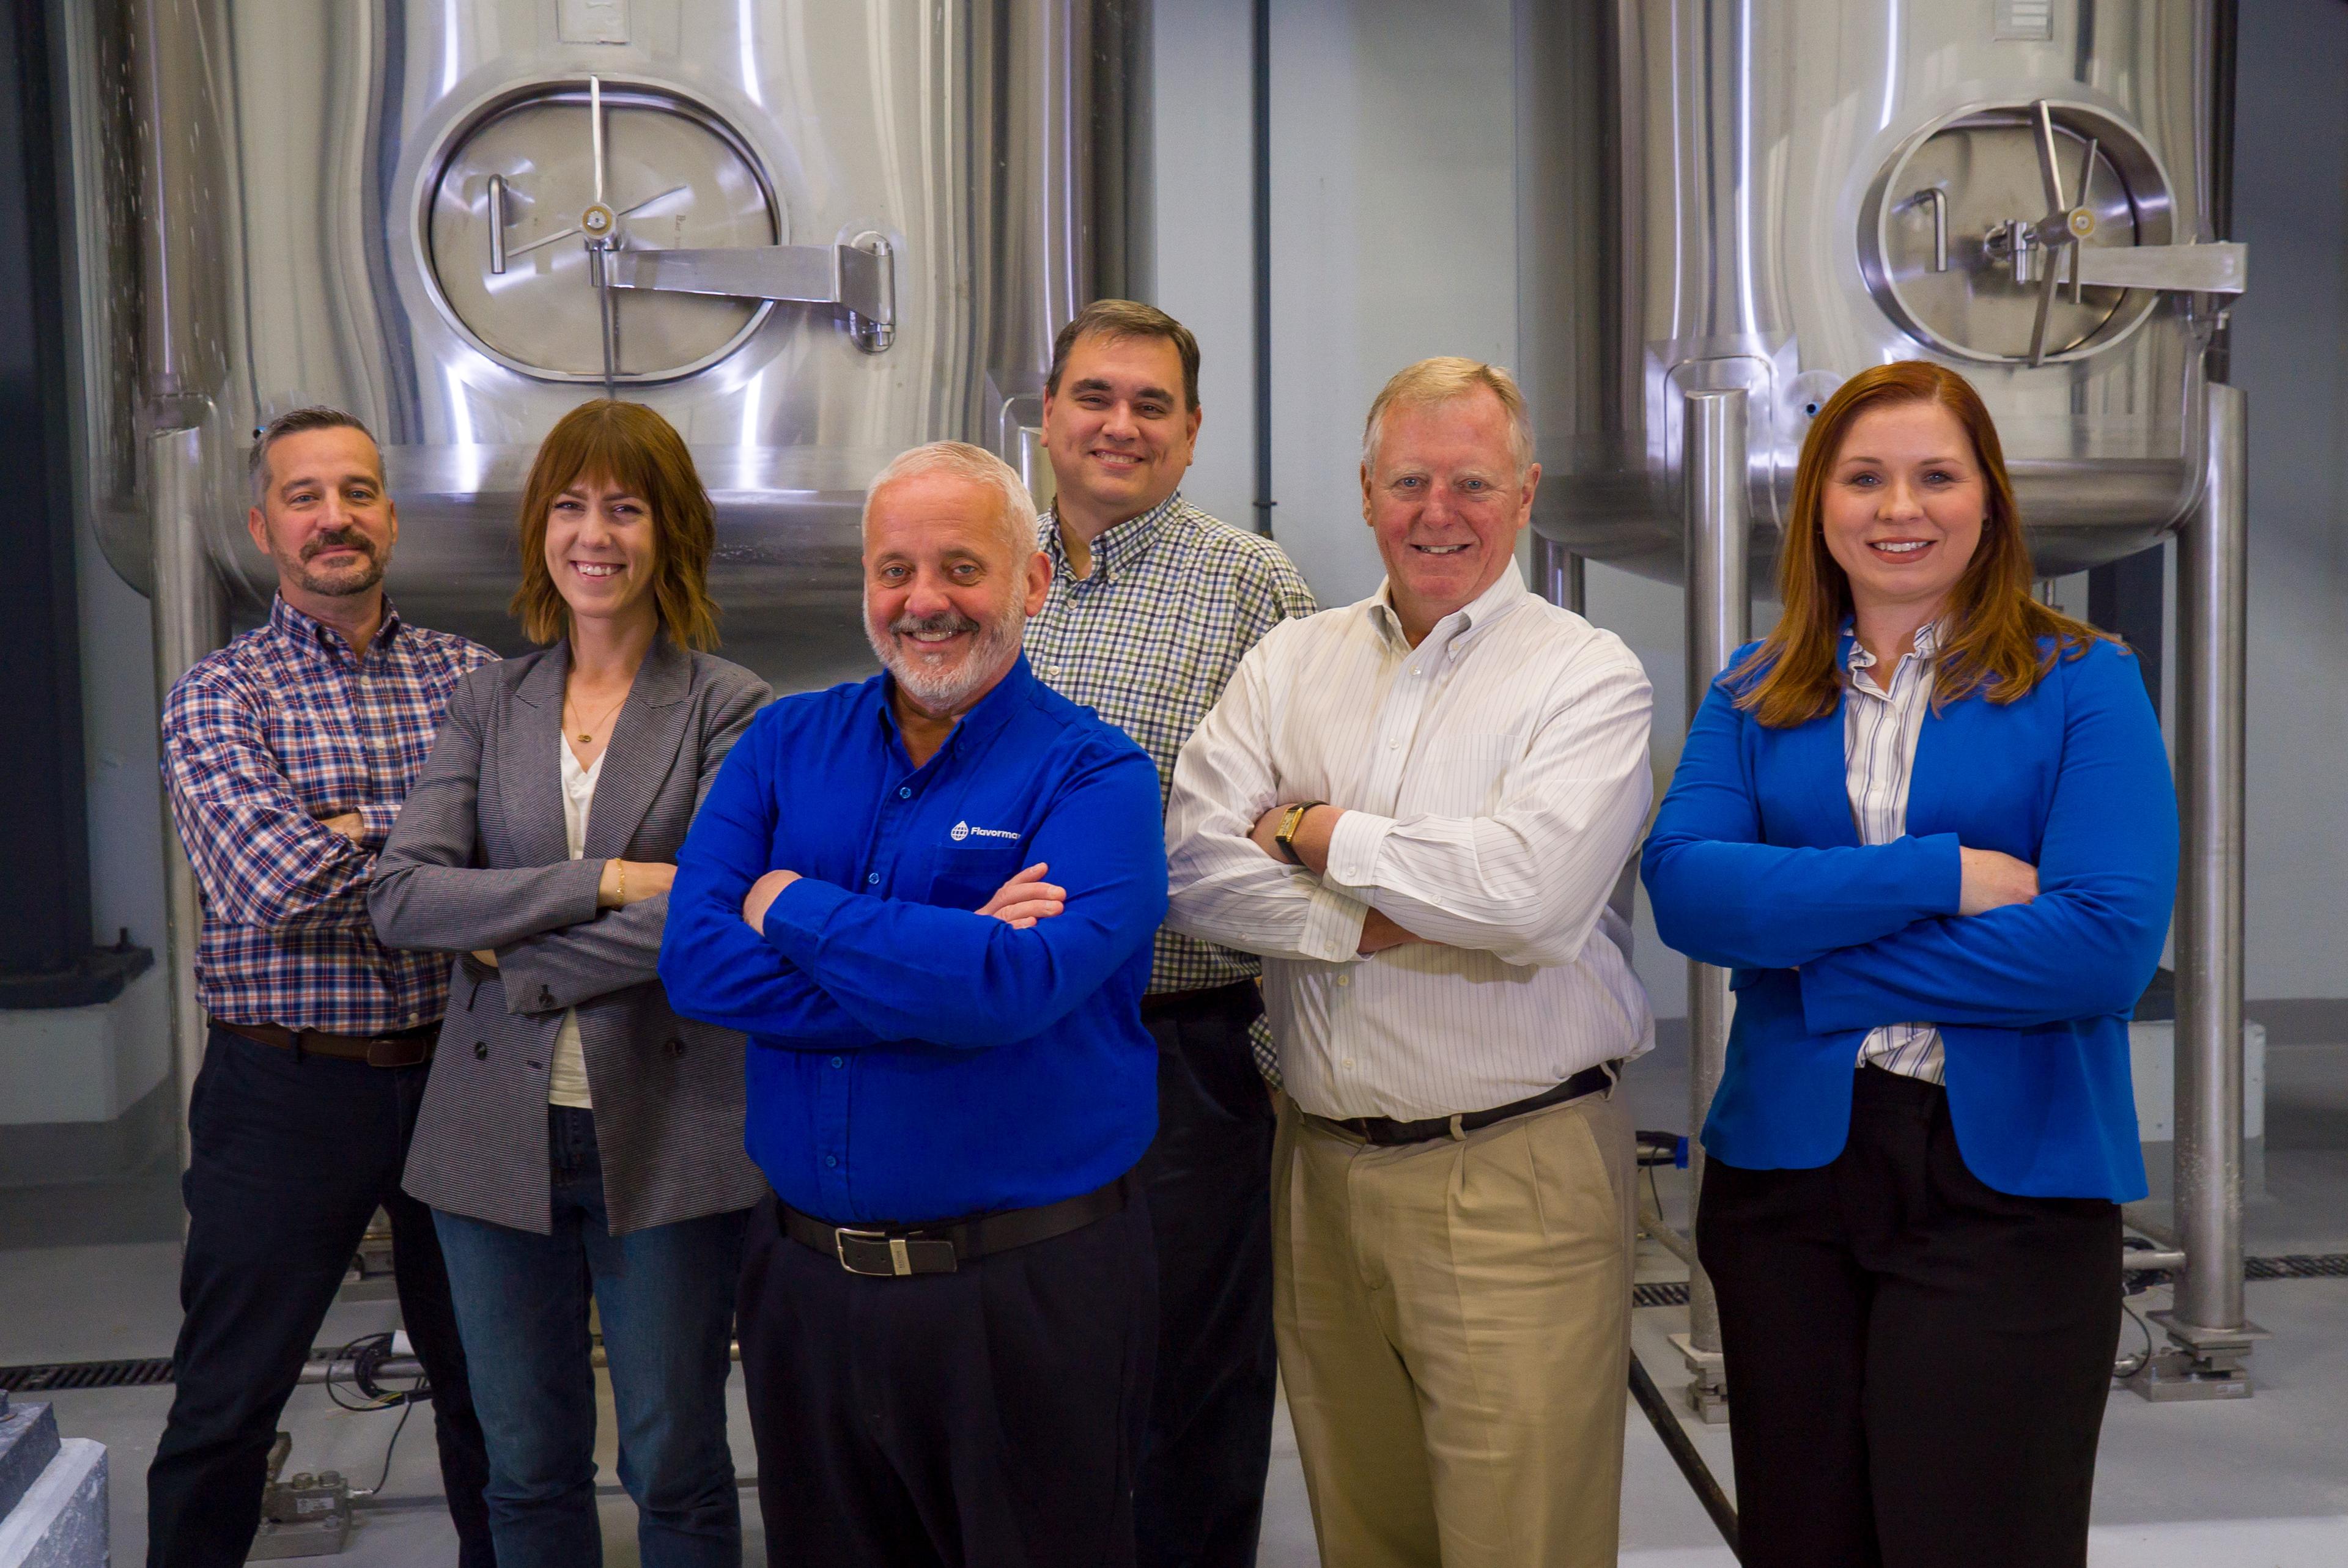 Flavorman employees posing in front of tanks